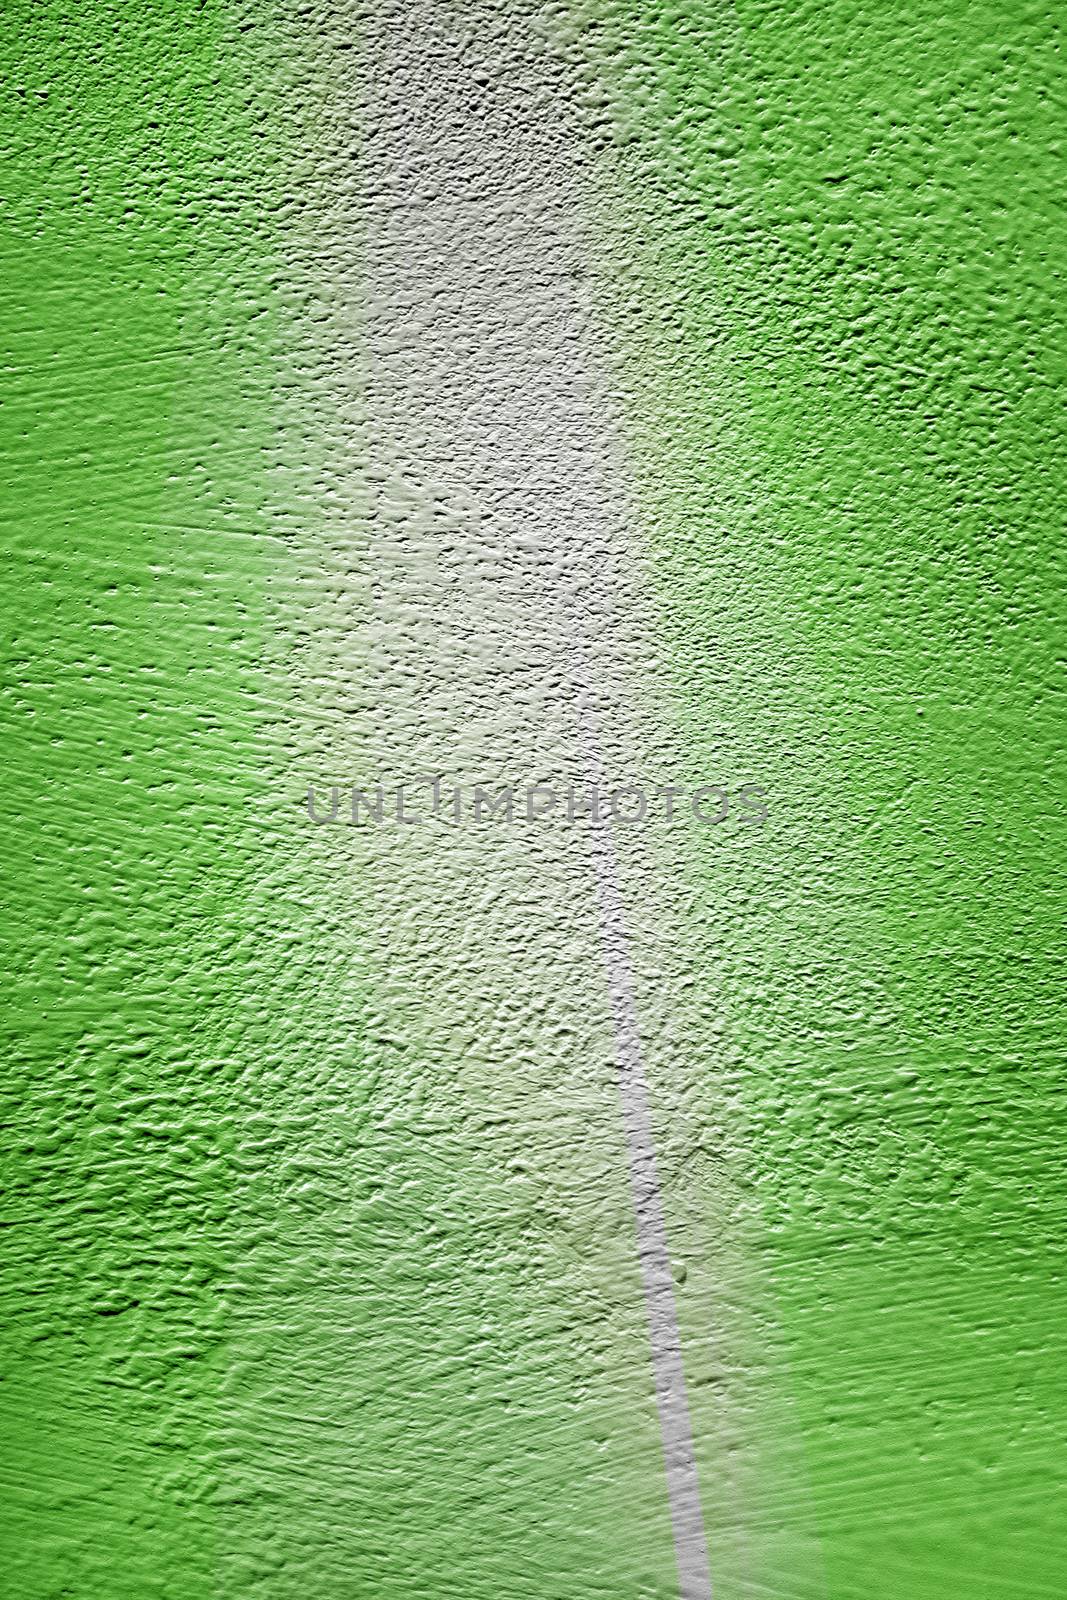 Green wall stucco background with gray line